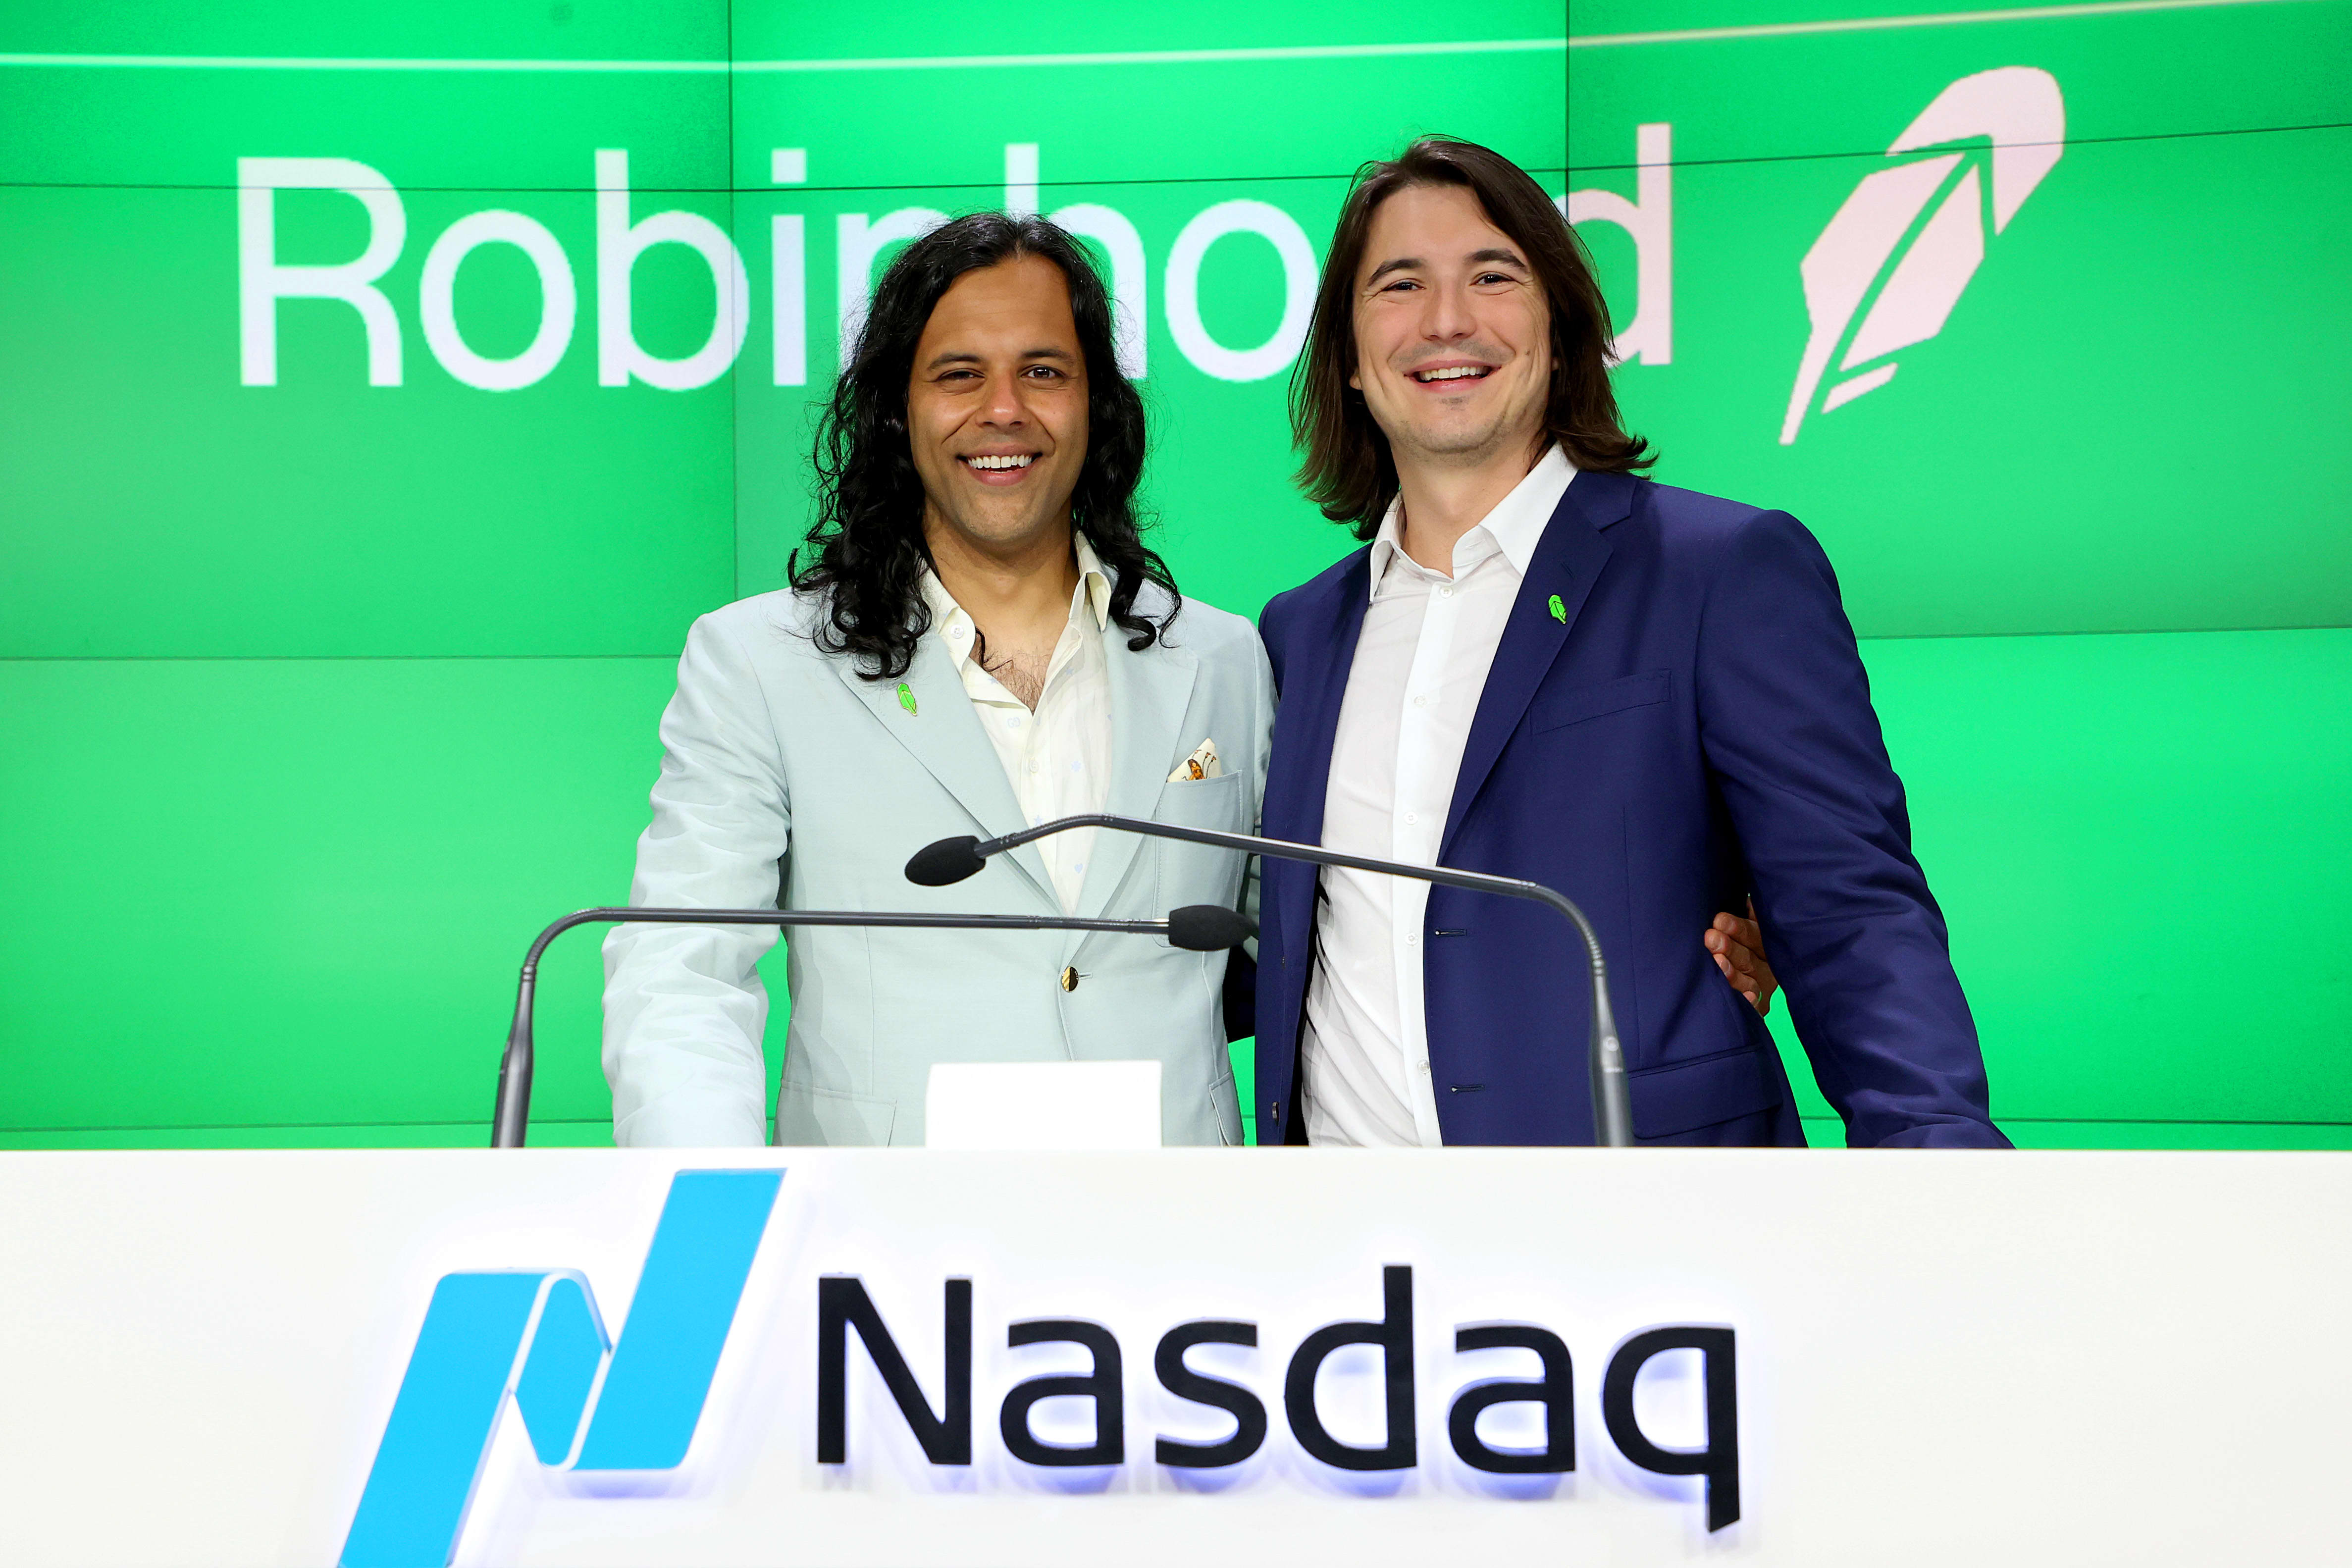 Robinhood shares turn positive after falling as much as 14%